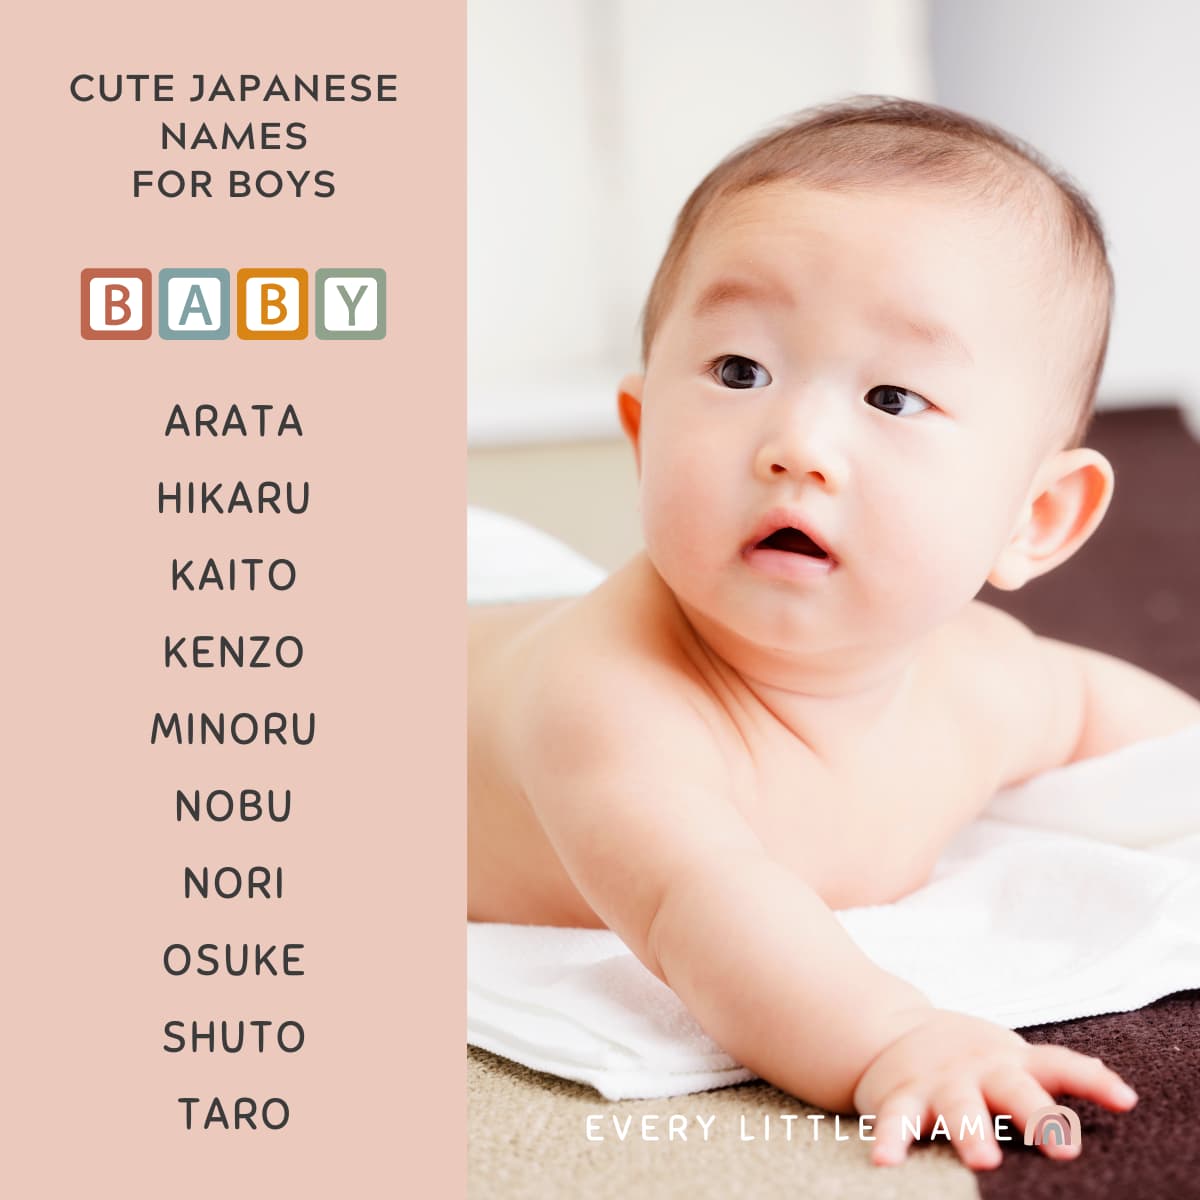 Japanese baby crawling on towel and a list of cute Japanese names for boys.